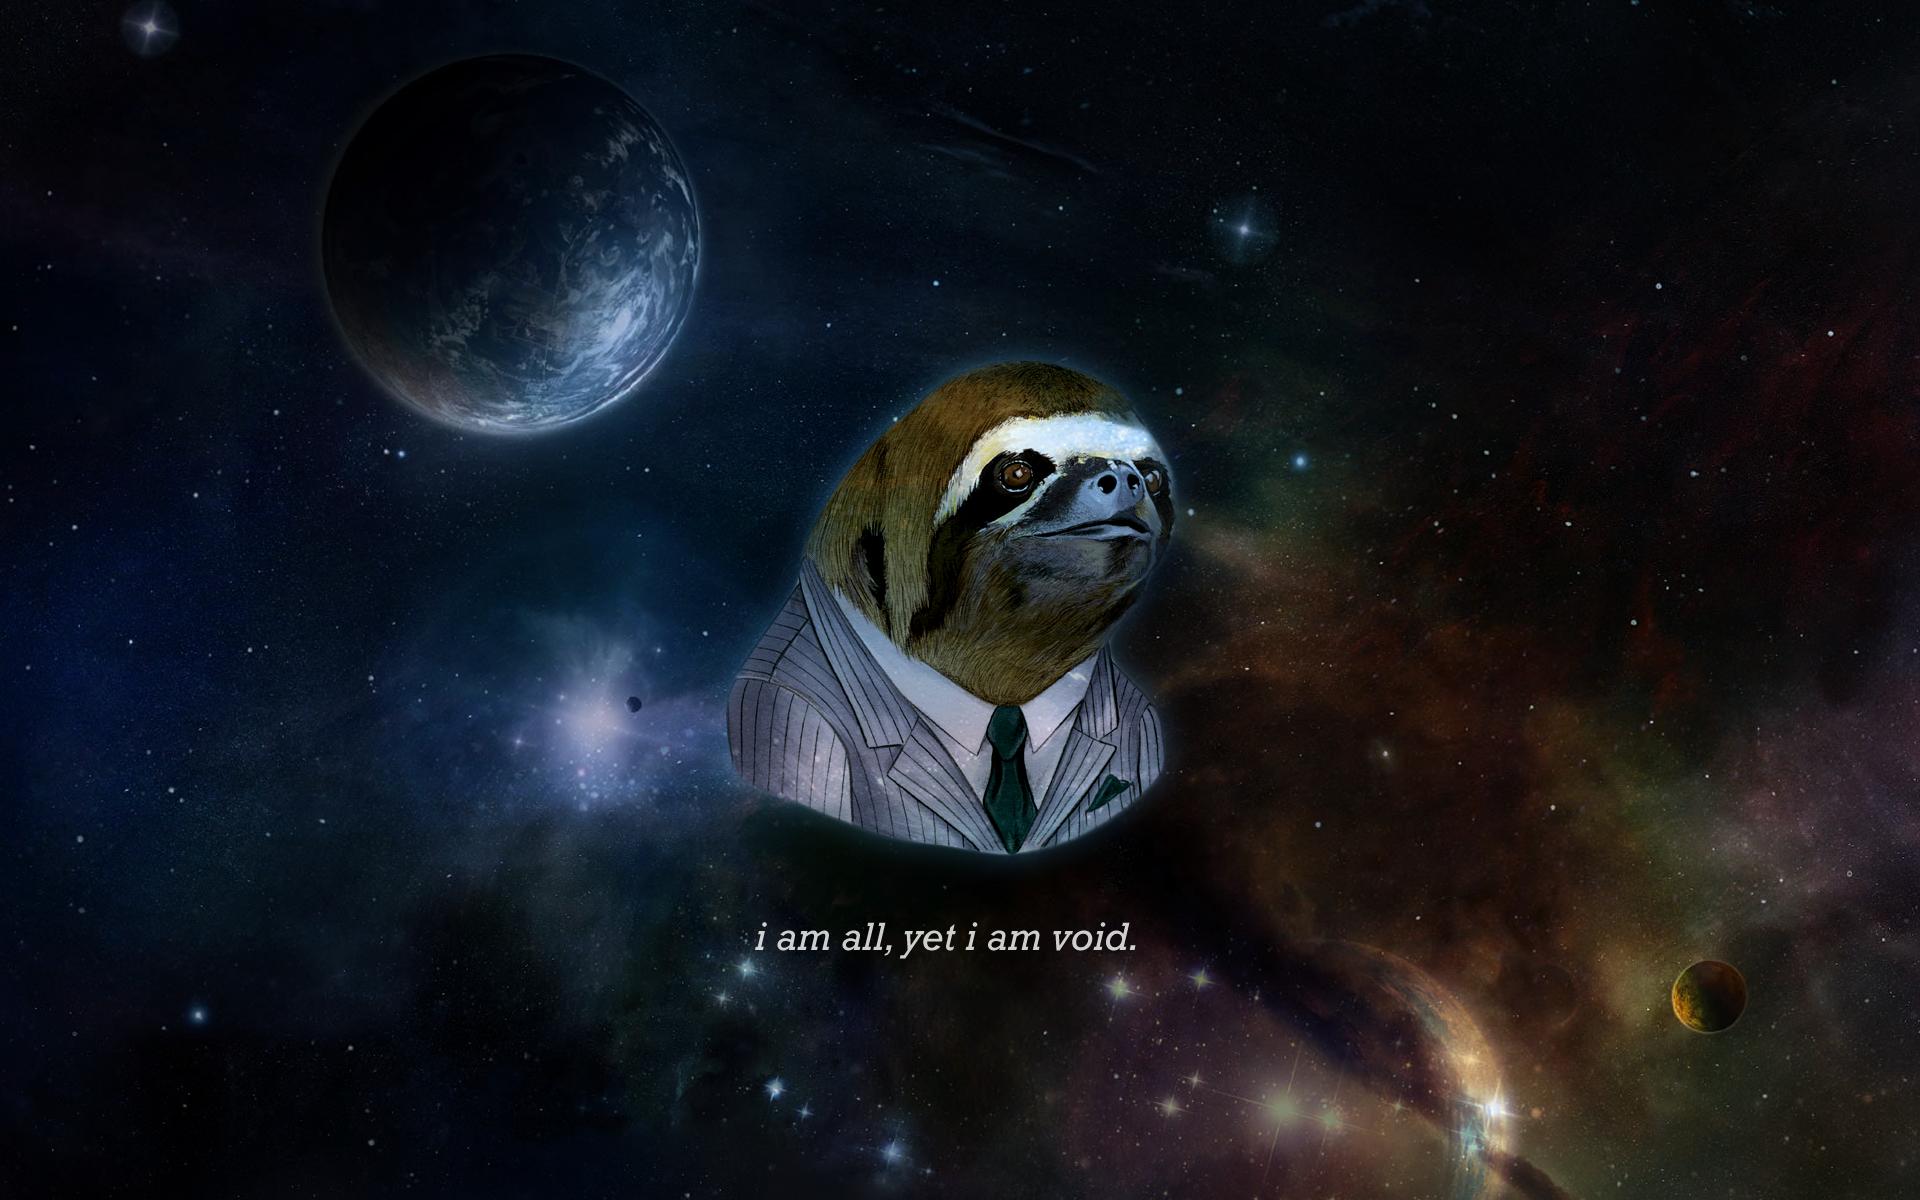 A sloth in a suit floating in space. - Sloth